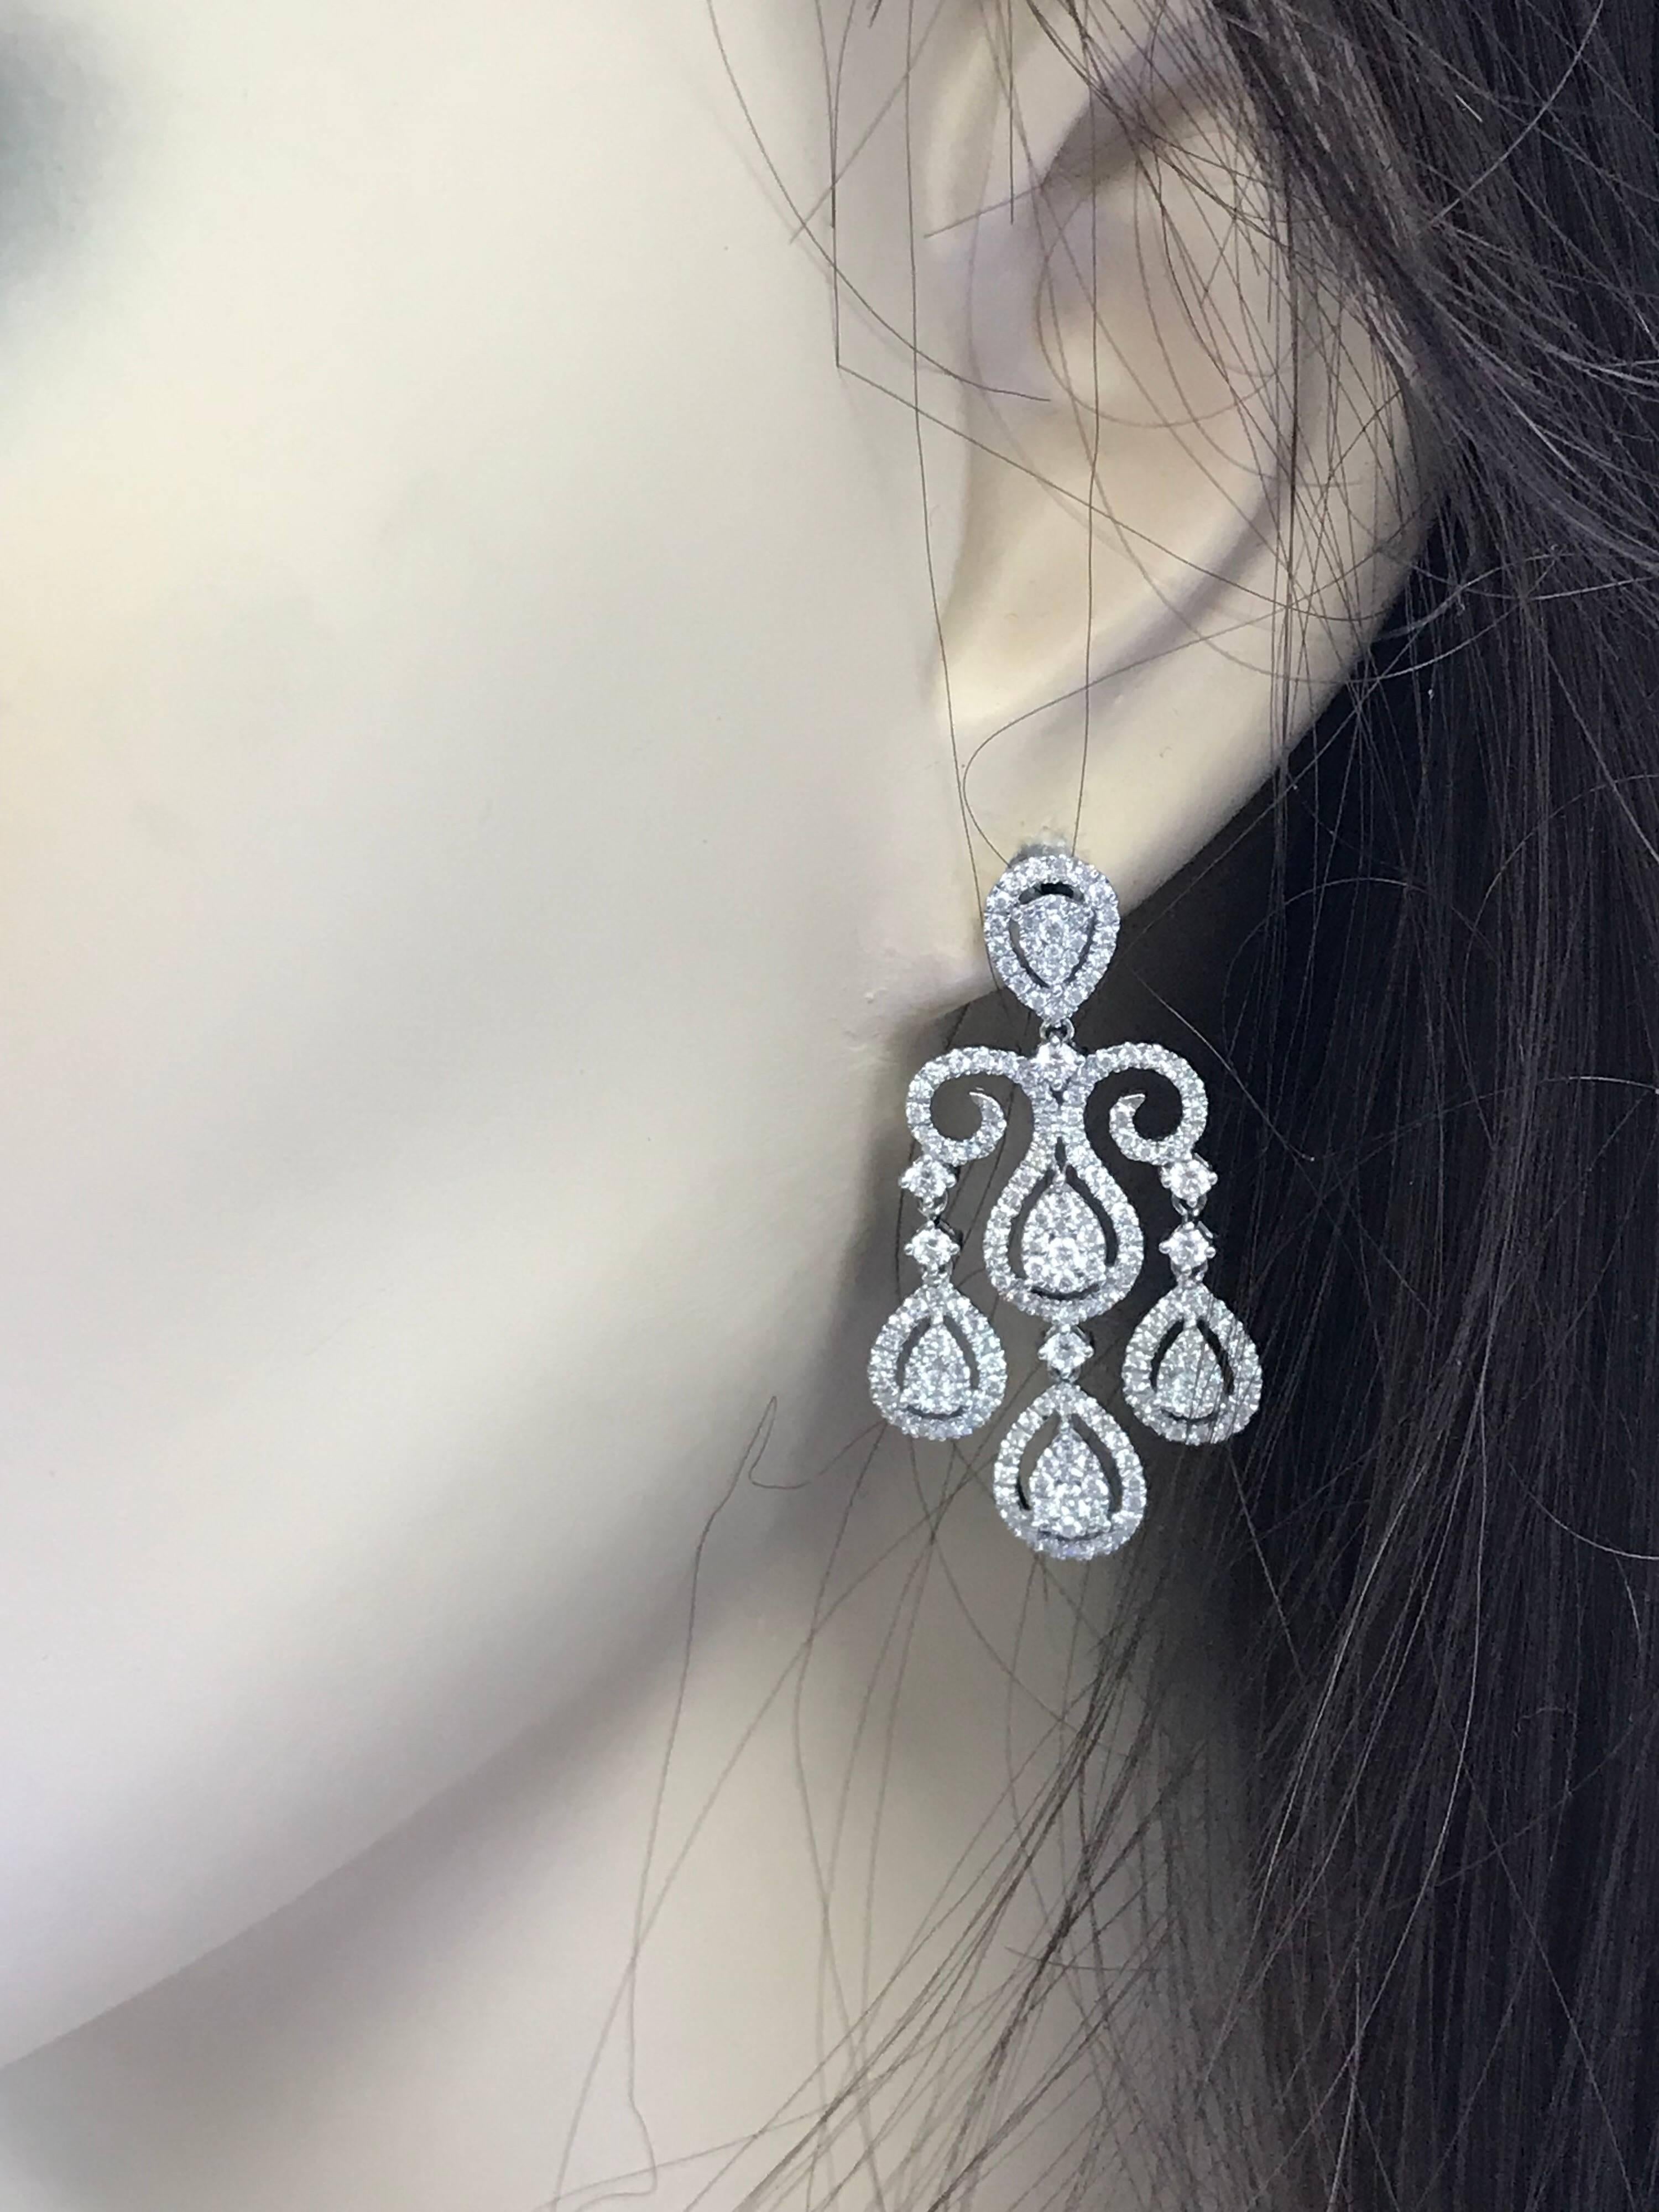 This Earring Features:
2.65 Cts. Total Cts. Weight
Gold: 18k white gold
Metal Weight: 8.5 g.
Diamond: Round
Diamond Count: 352
Diamond Color: G
Diamond Clarity: Si1+